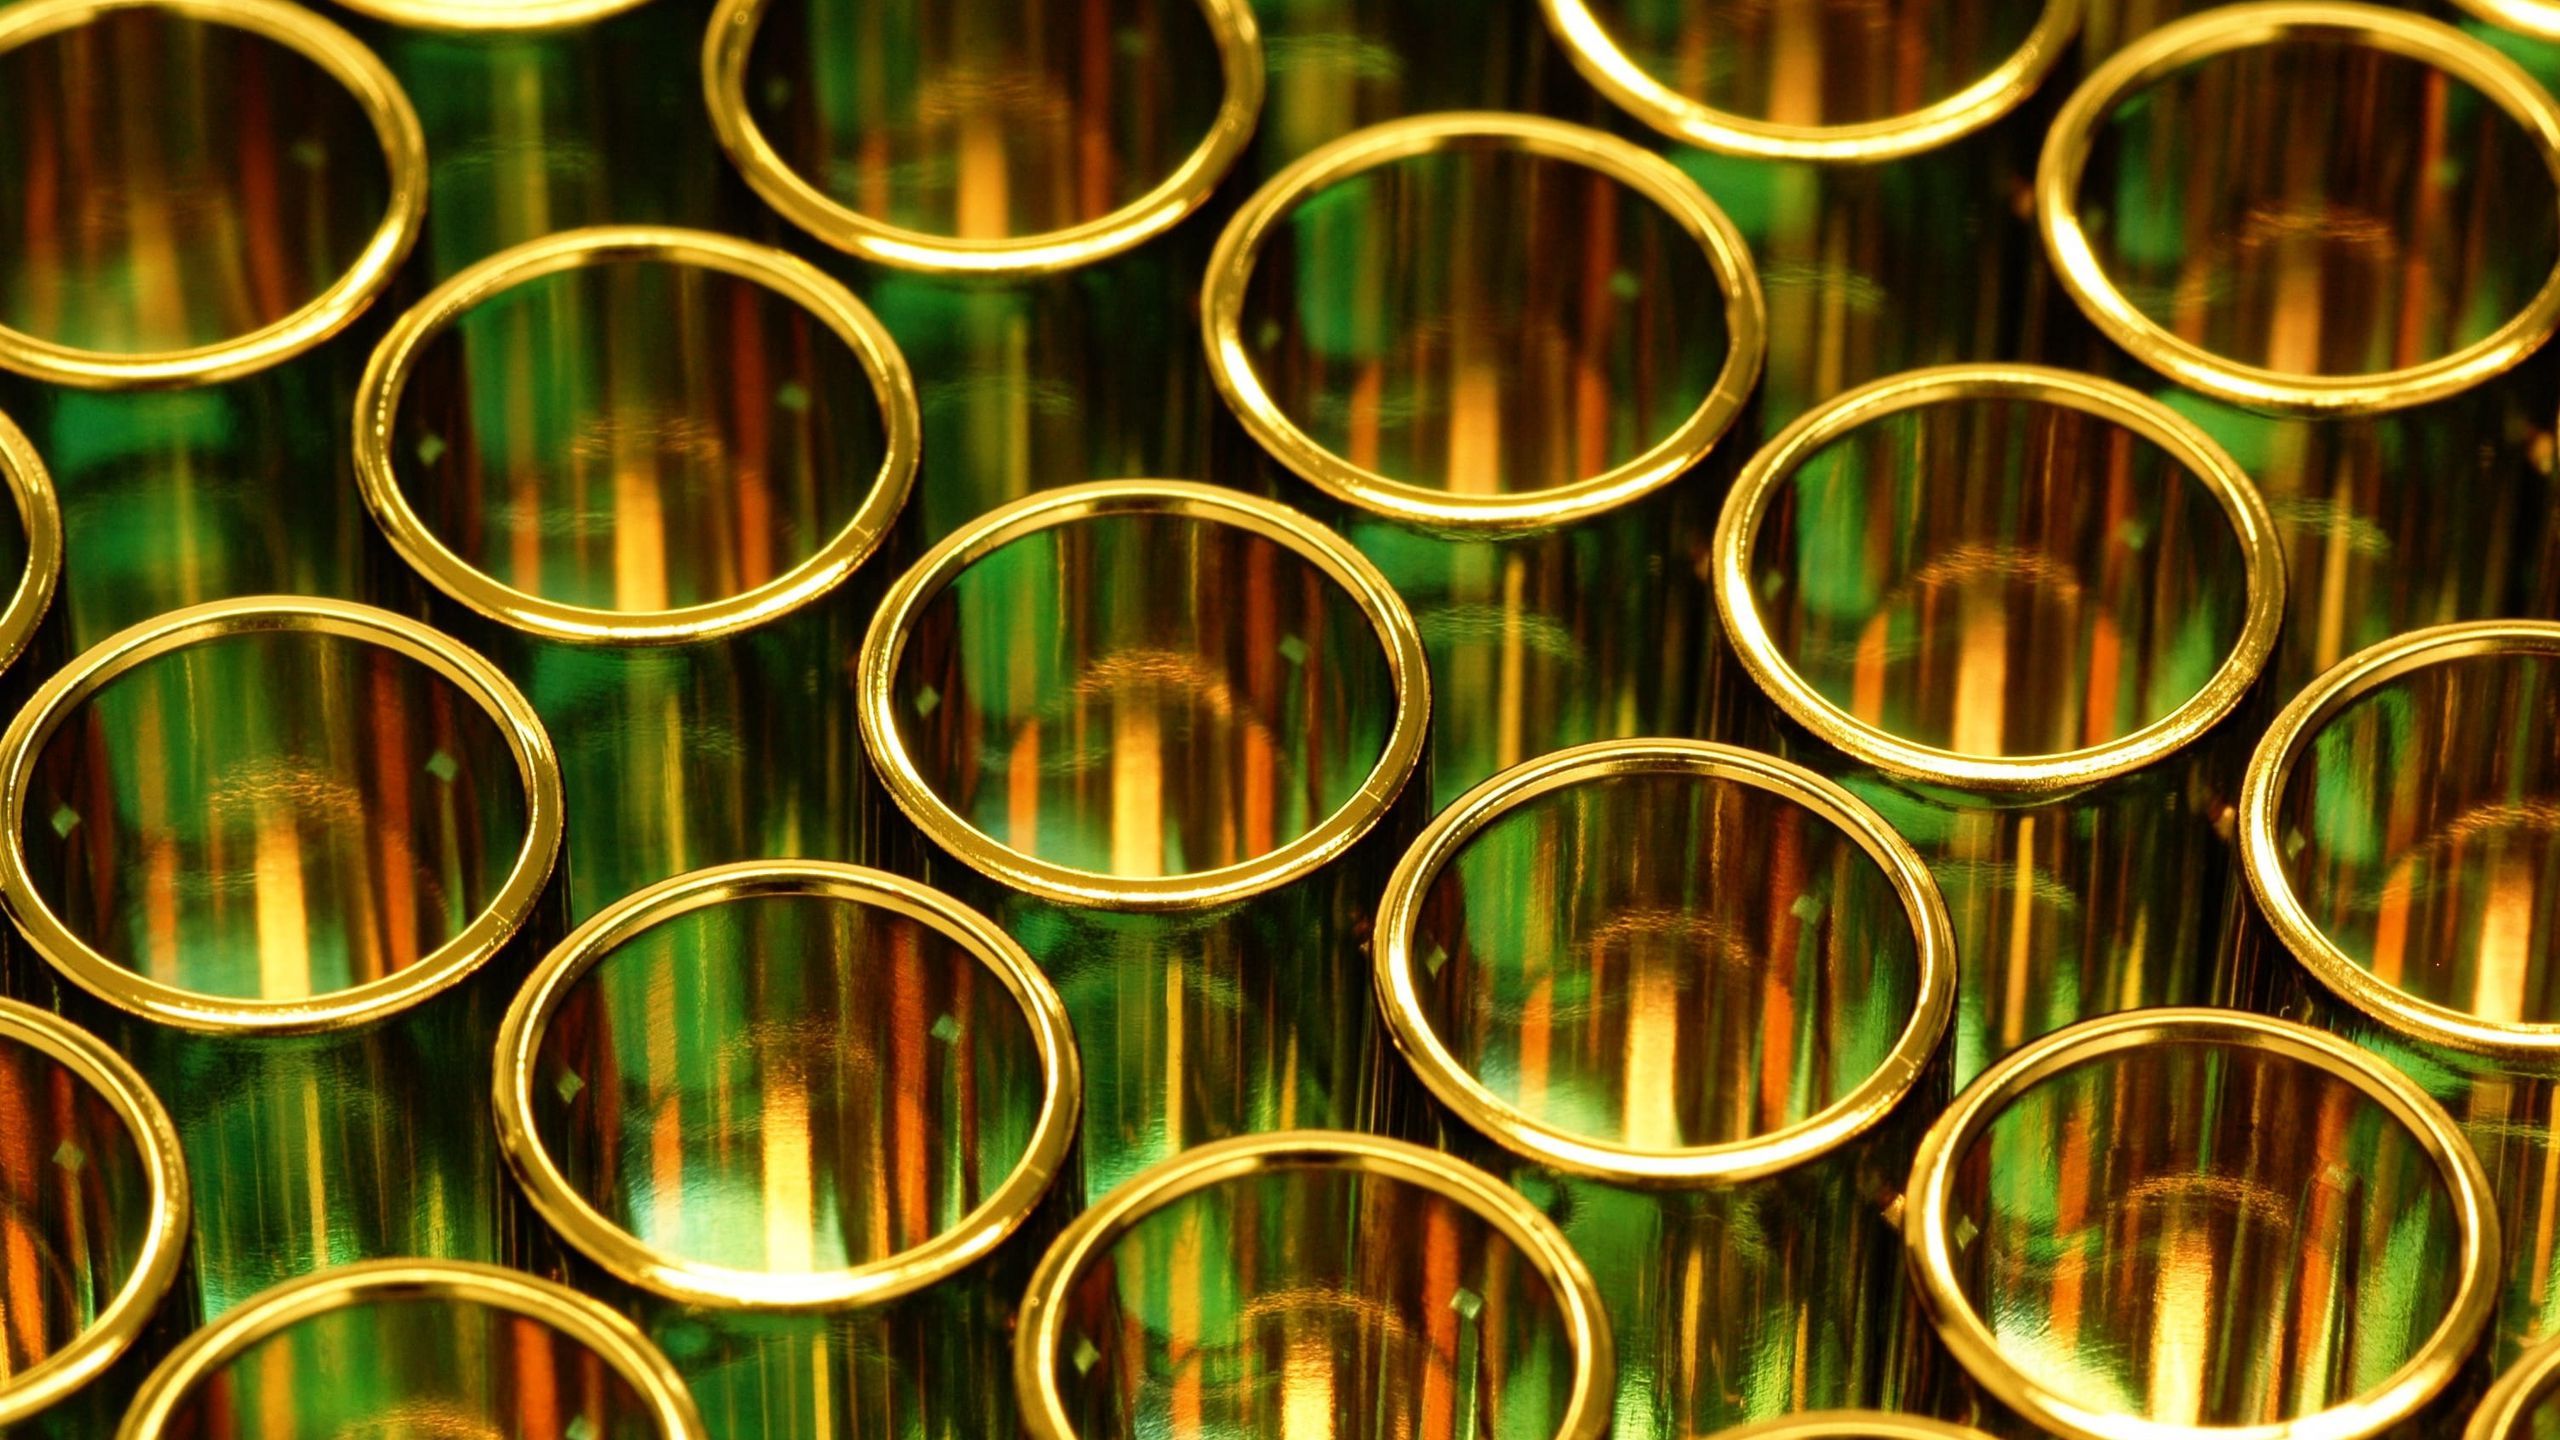 Download wallpaper 2560x1440 gold, pipes, circles, shapes widescreen 16:9 HD background